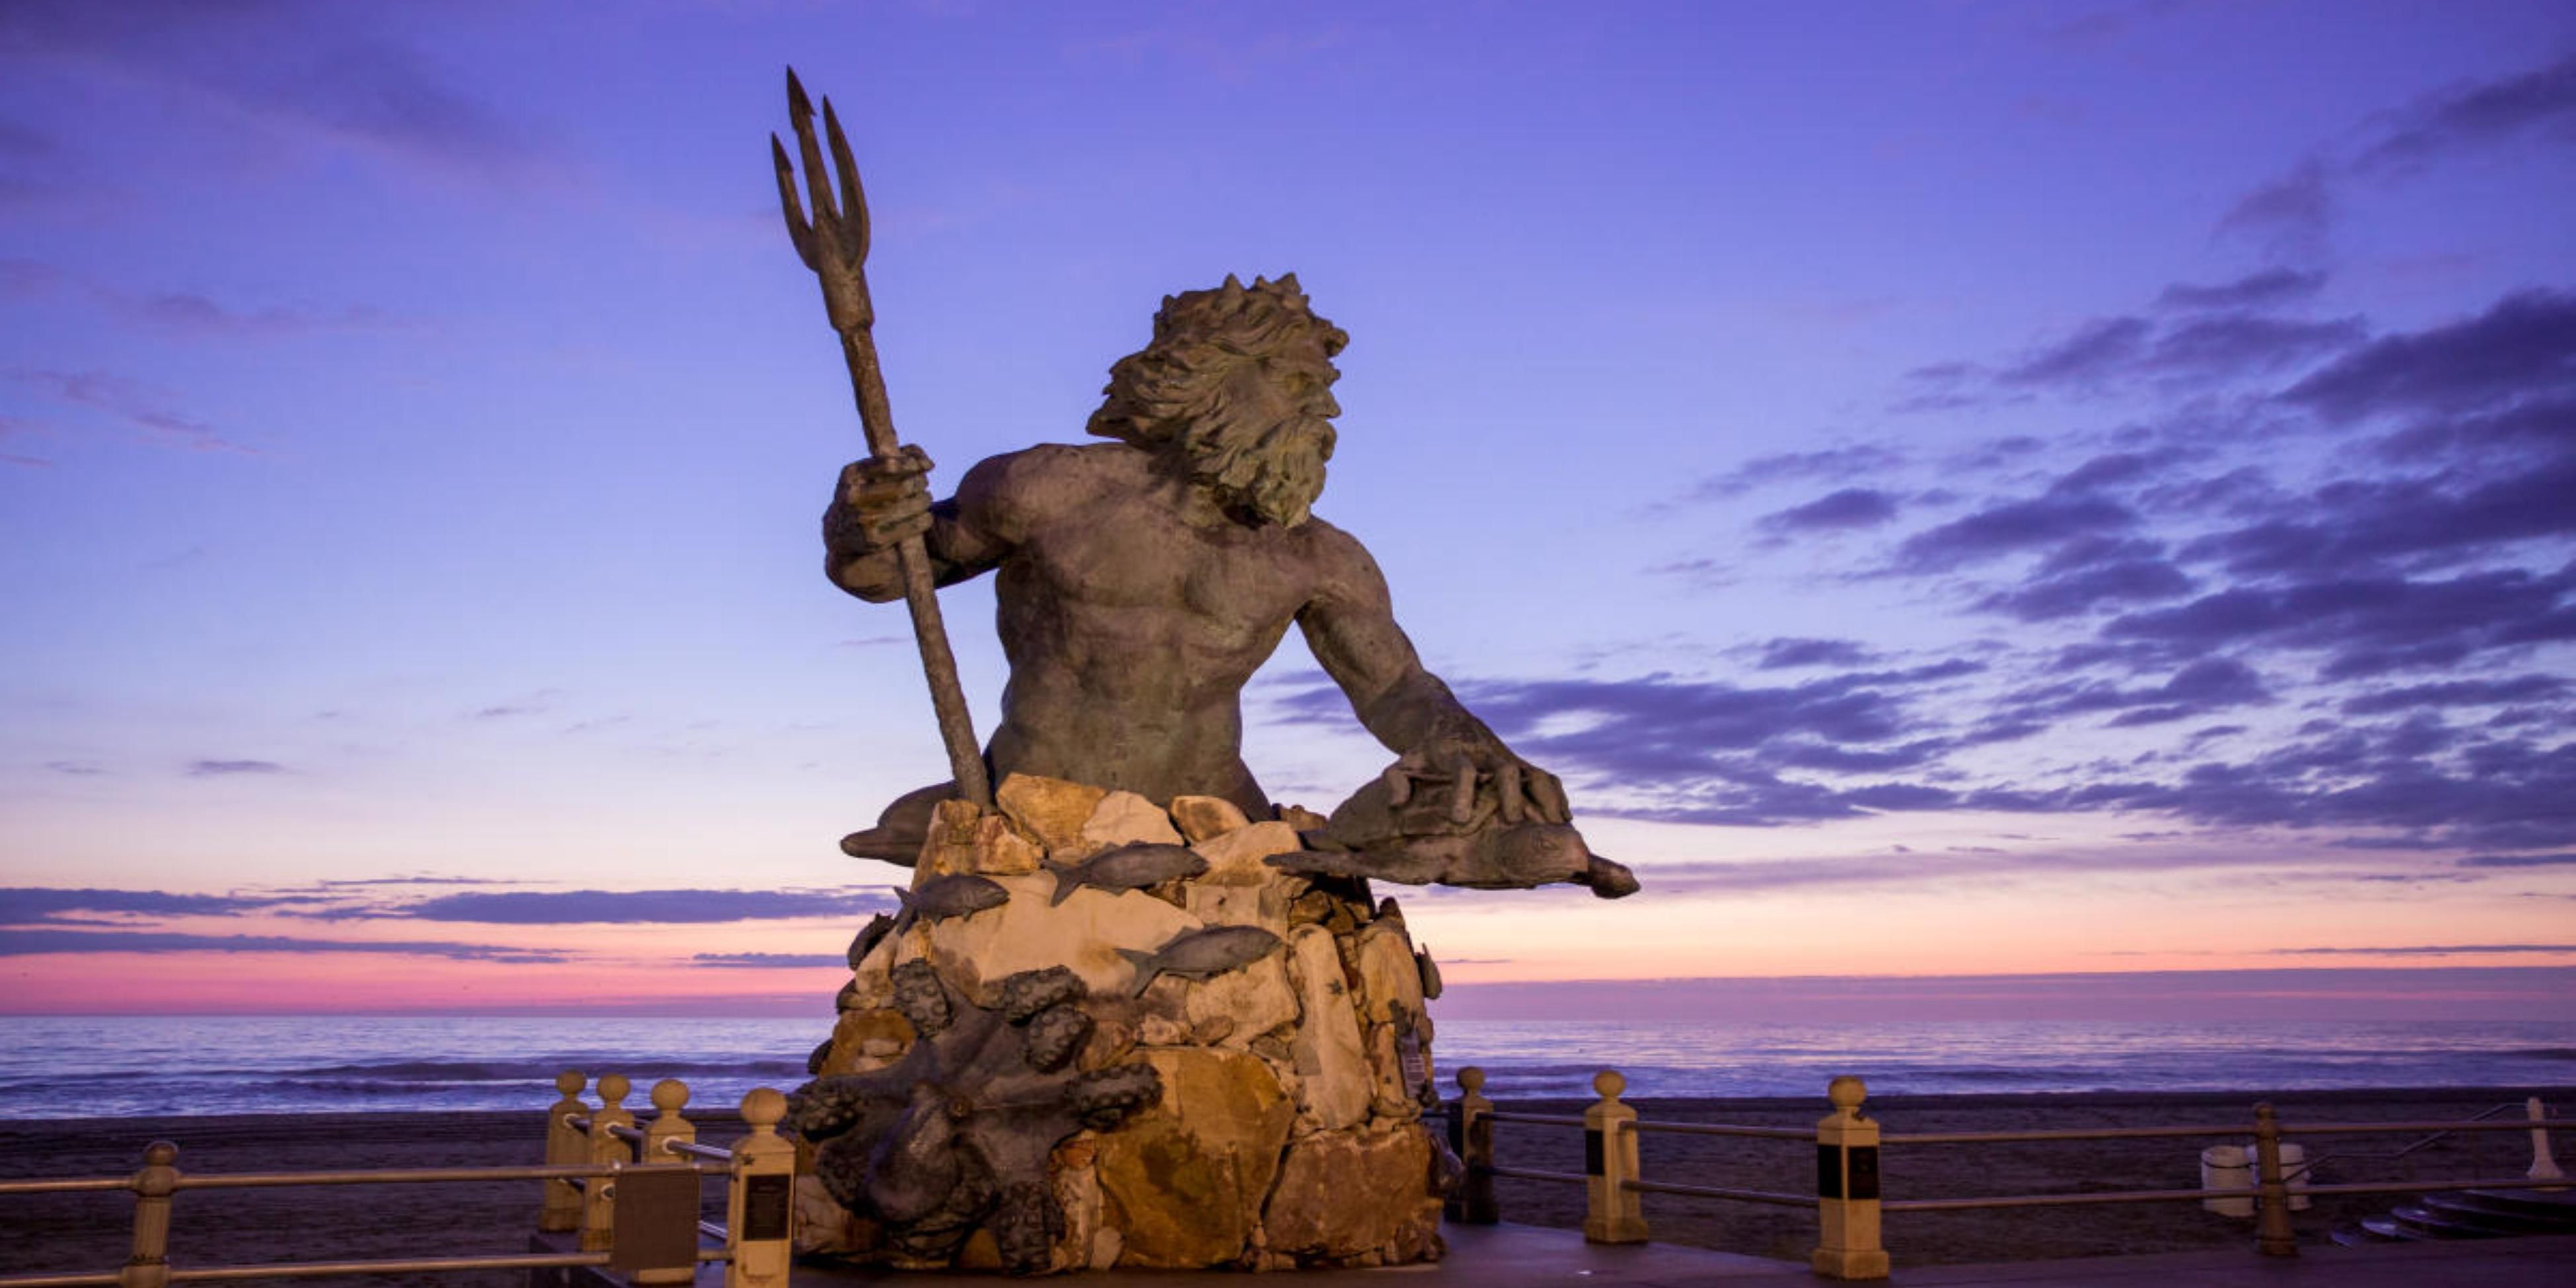 Looking to escape to the beach for a vacation or a long weekend? Our hotel is centrally located for easy interstate access and a short and straight forward 15 mile drive to the gorgeous Virginia Beach Oceanfront. While there, make sure to stop by the King Neptune statue and get your picture taken!